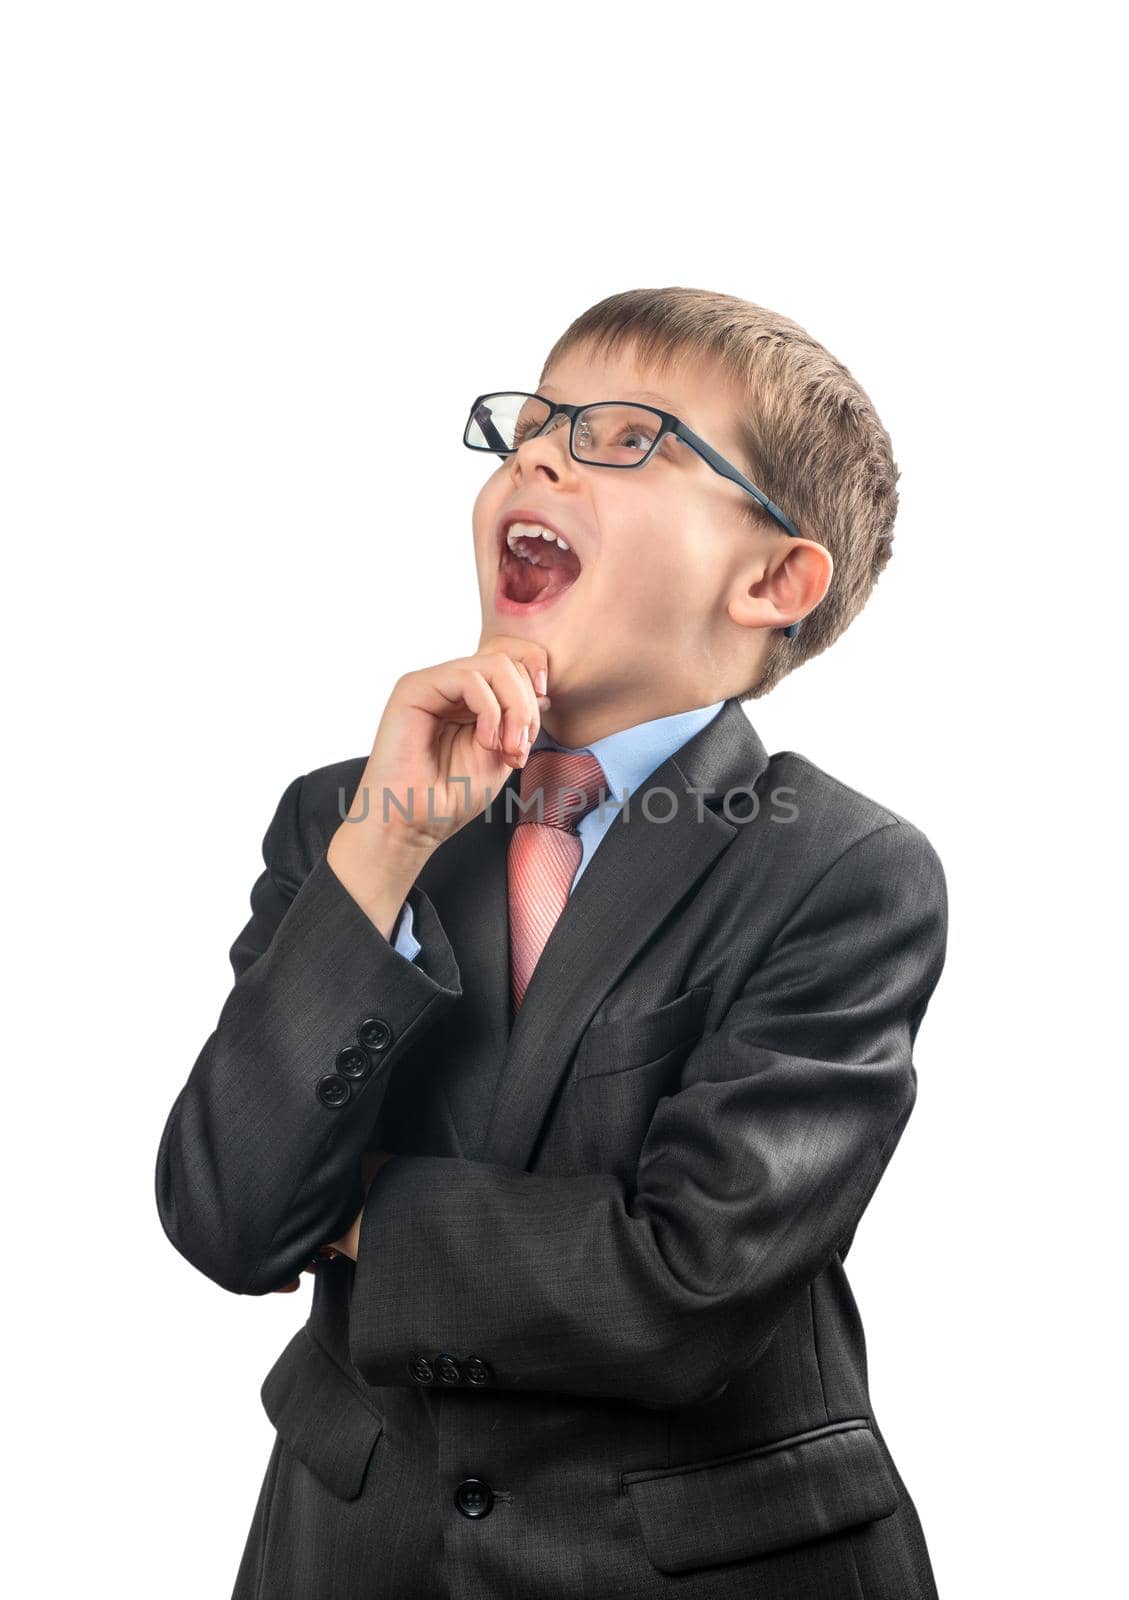 Portrait of a schoolboy looking up with an open mouth on a white background